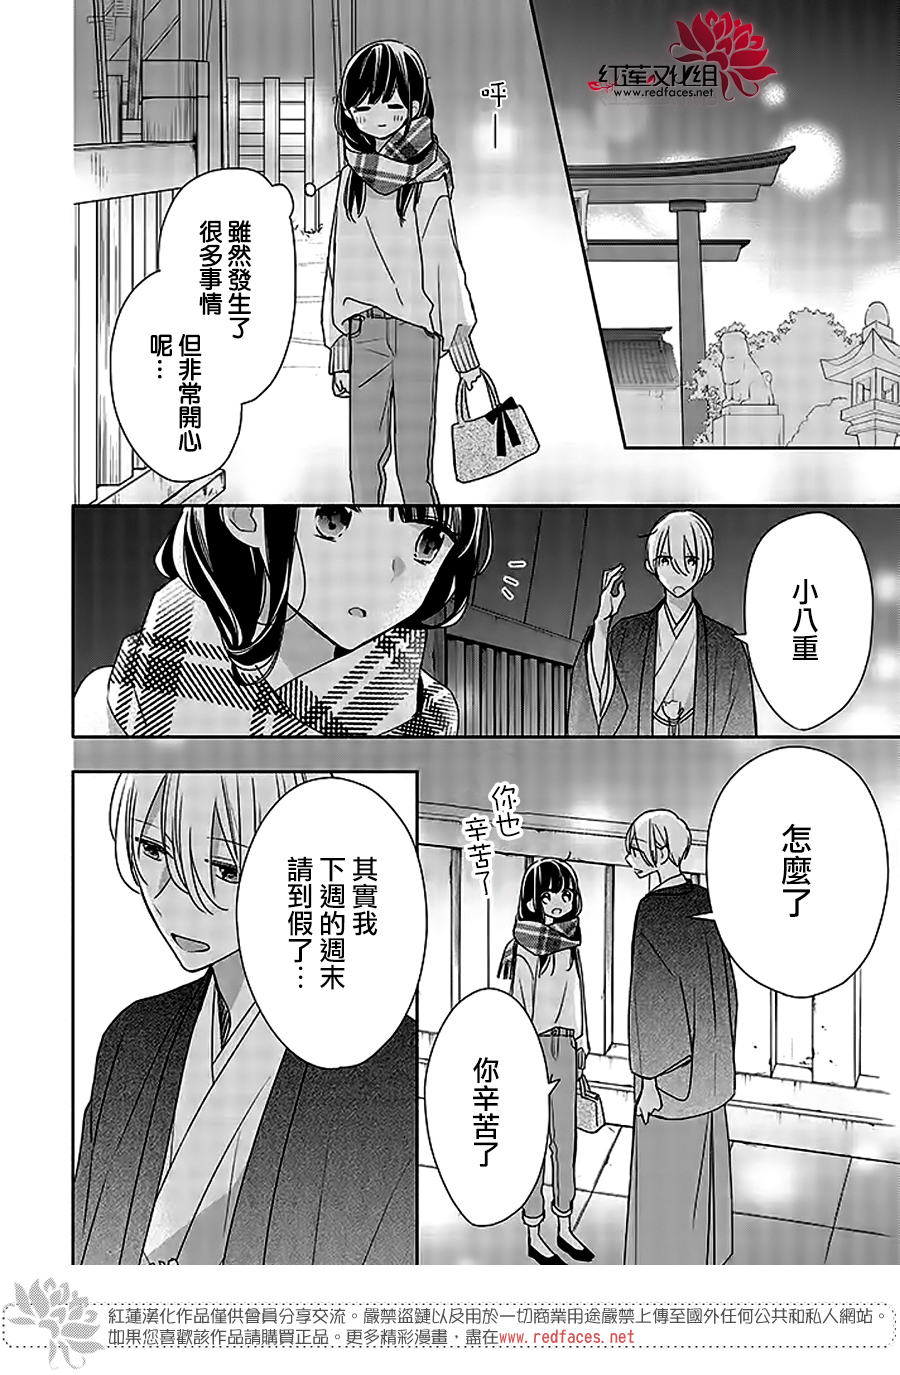 If given a second chance - 第38話 - 6